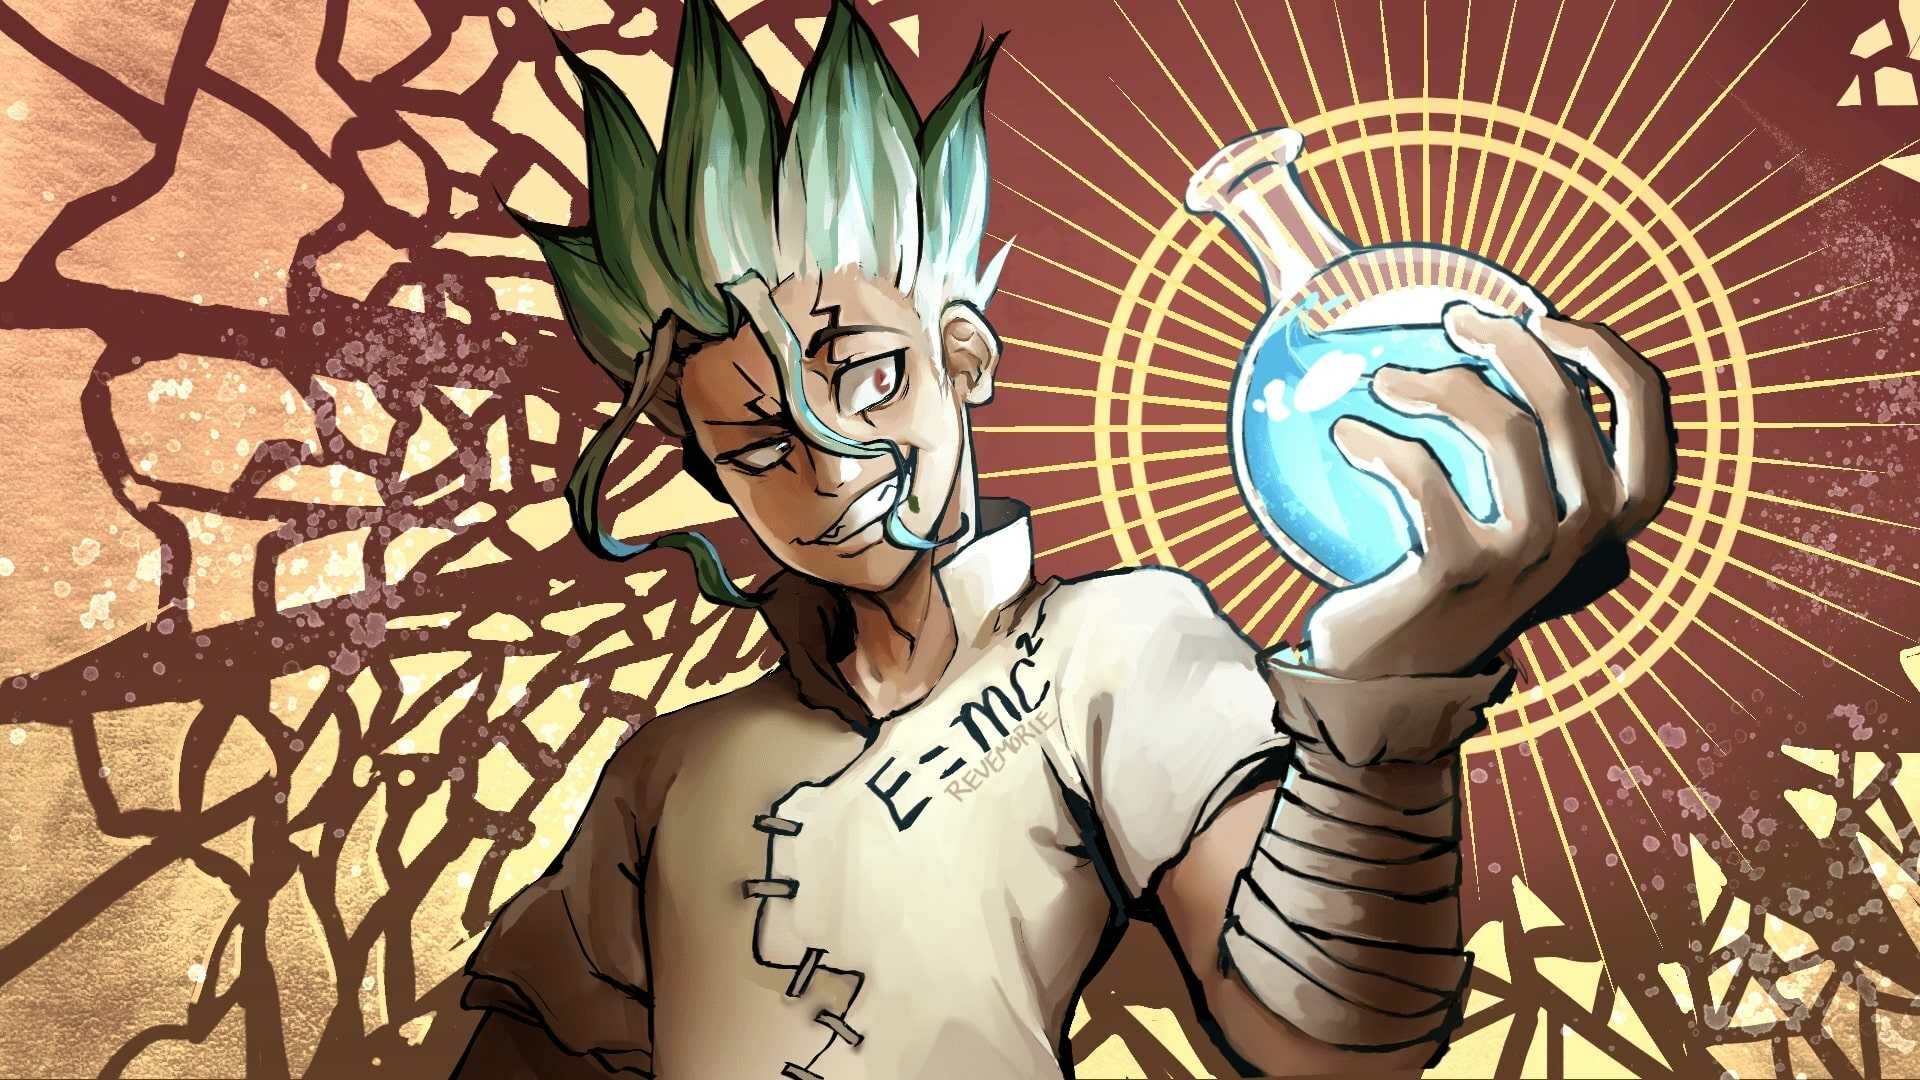 Dr.STONE: The de facto leader of the Kingdom of Science. 1920x1080 Full HD Background.